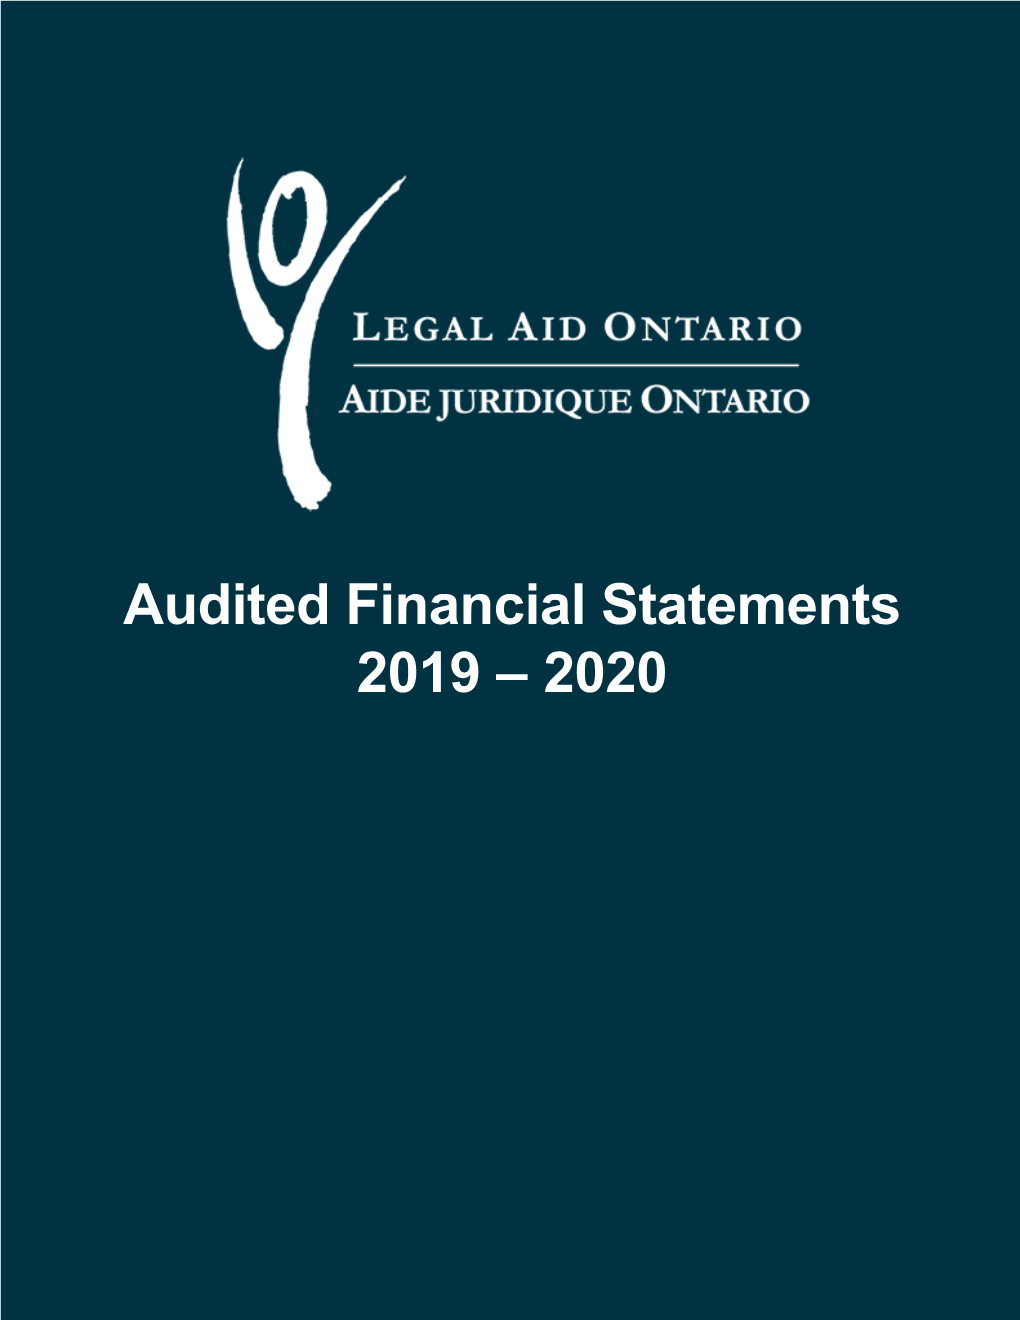 Audited Financial Statements 2019-2020